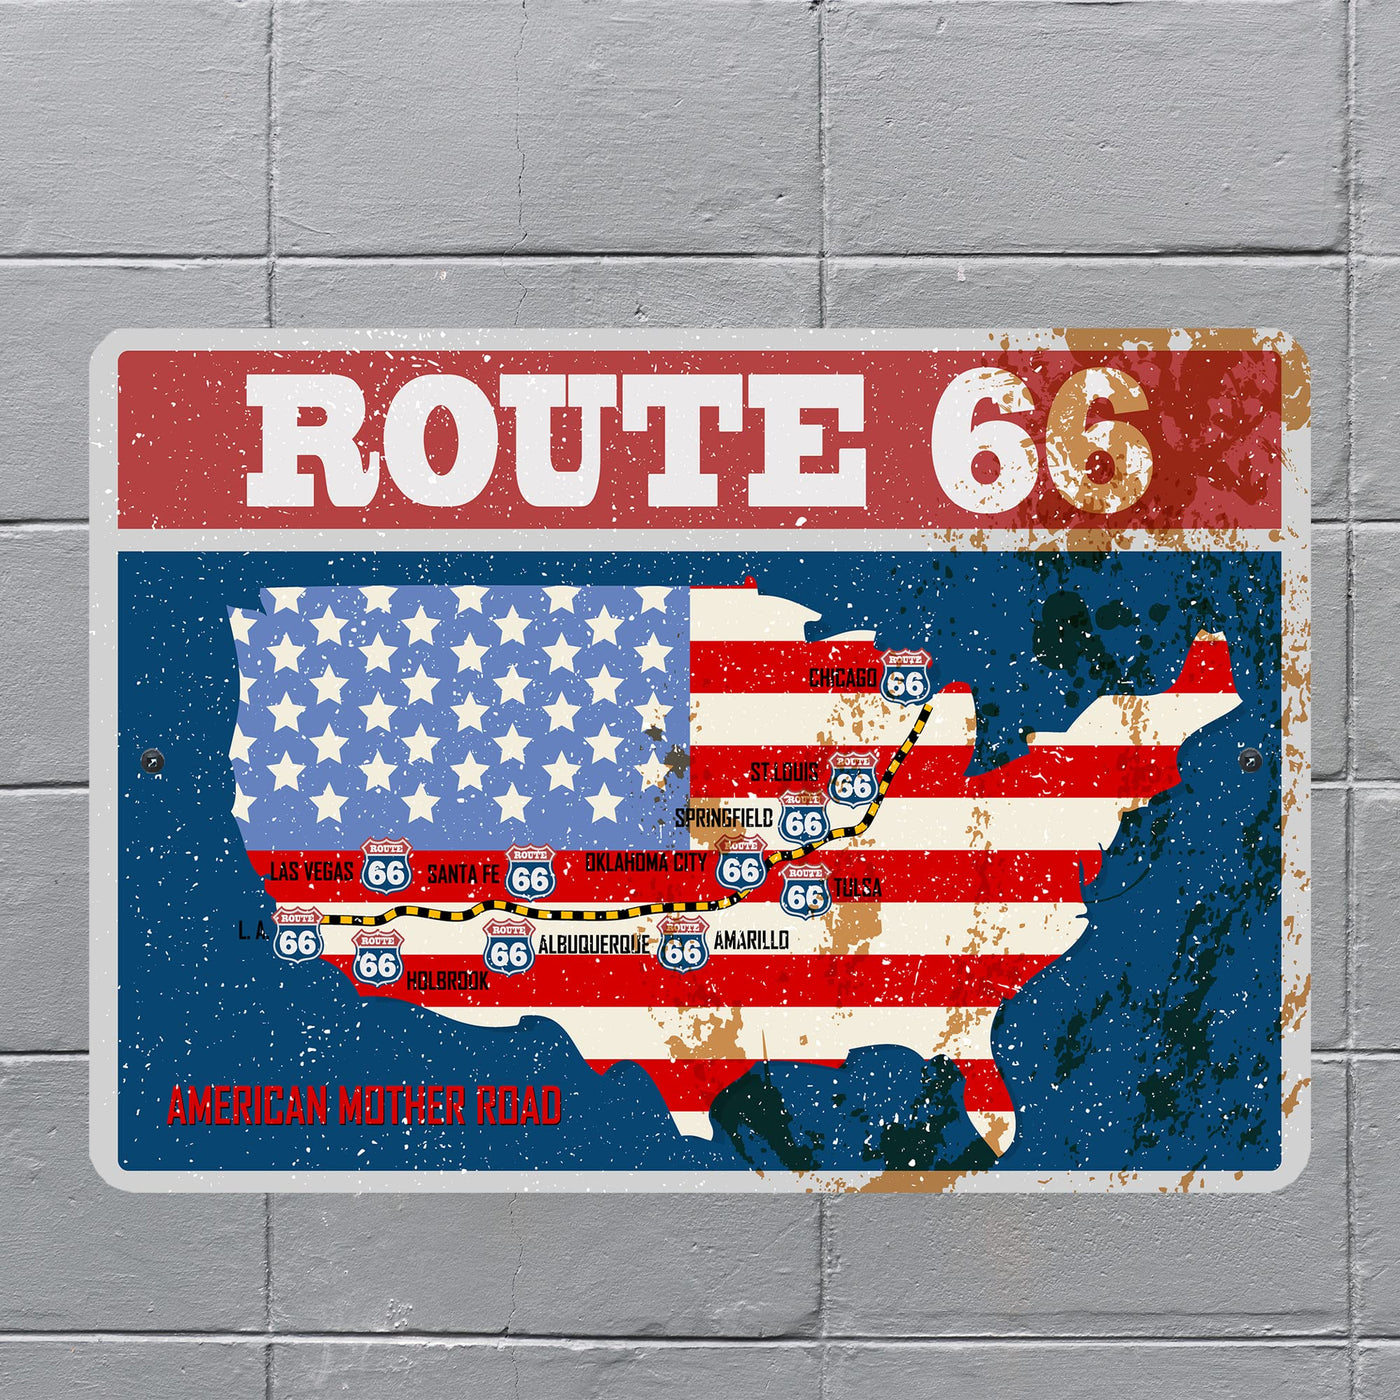 Route 66 Metal Wall Art Vintage Road Sign -12 x 8" Rustic American Flag USA Sign for Garage, Shop, Bar, Man Cave - Retro Tin Sign -Great for Home, Office Decor, Outdoor Accessories & Travel Gifts!